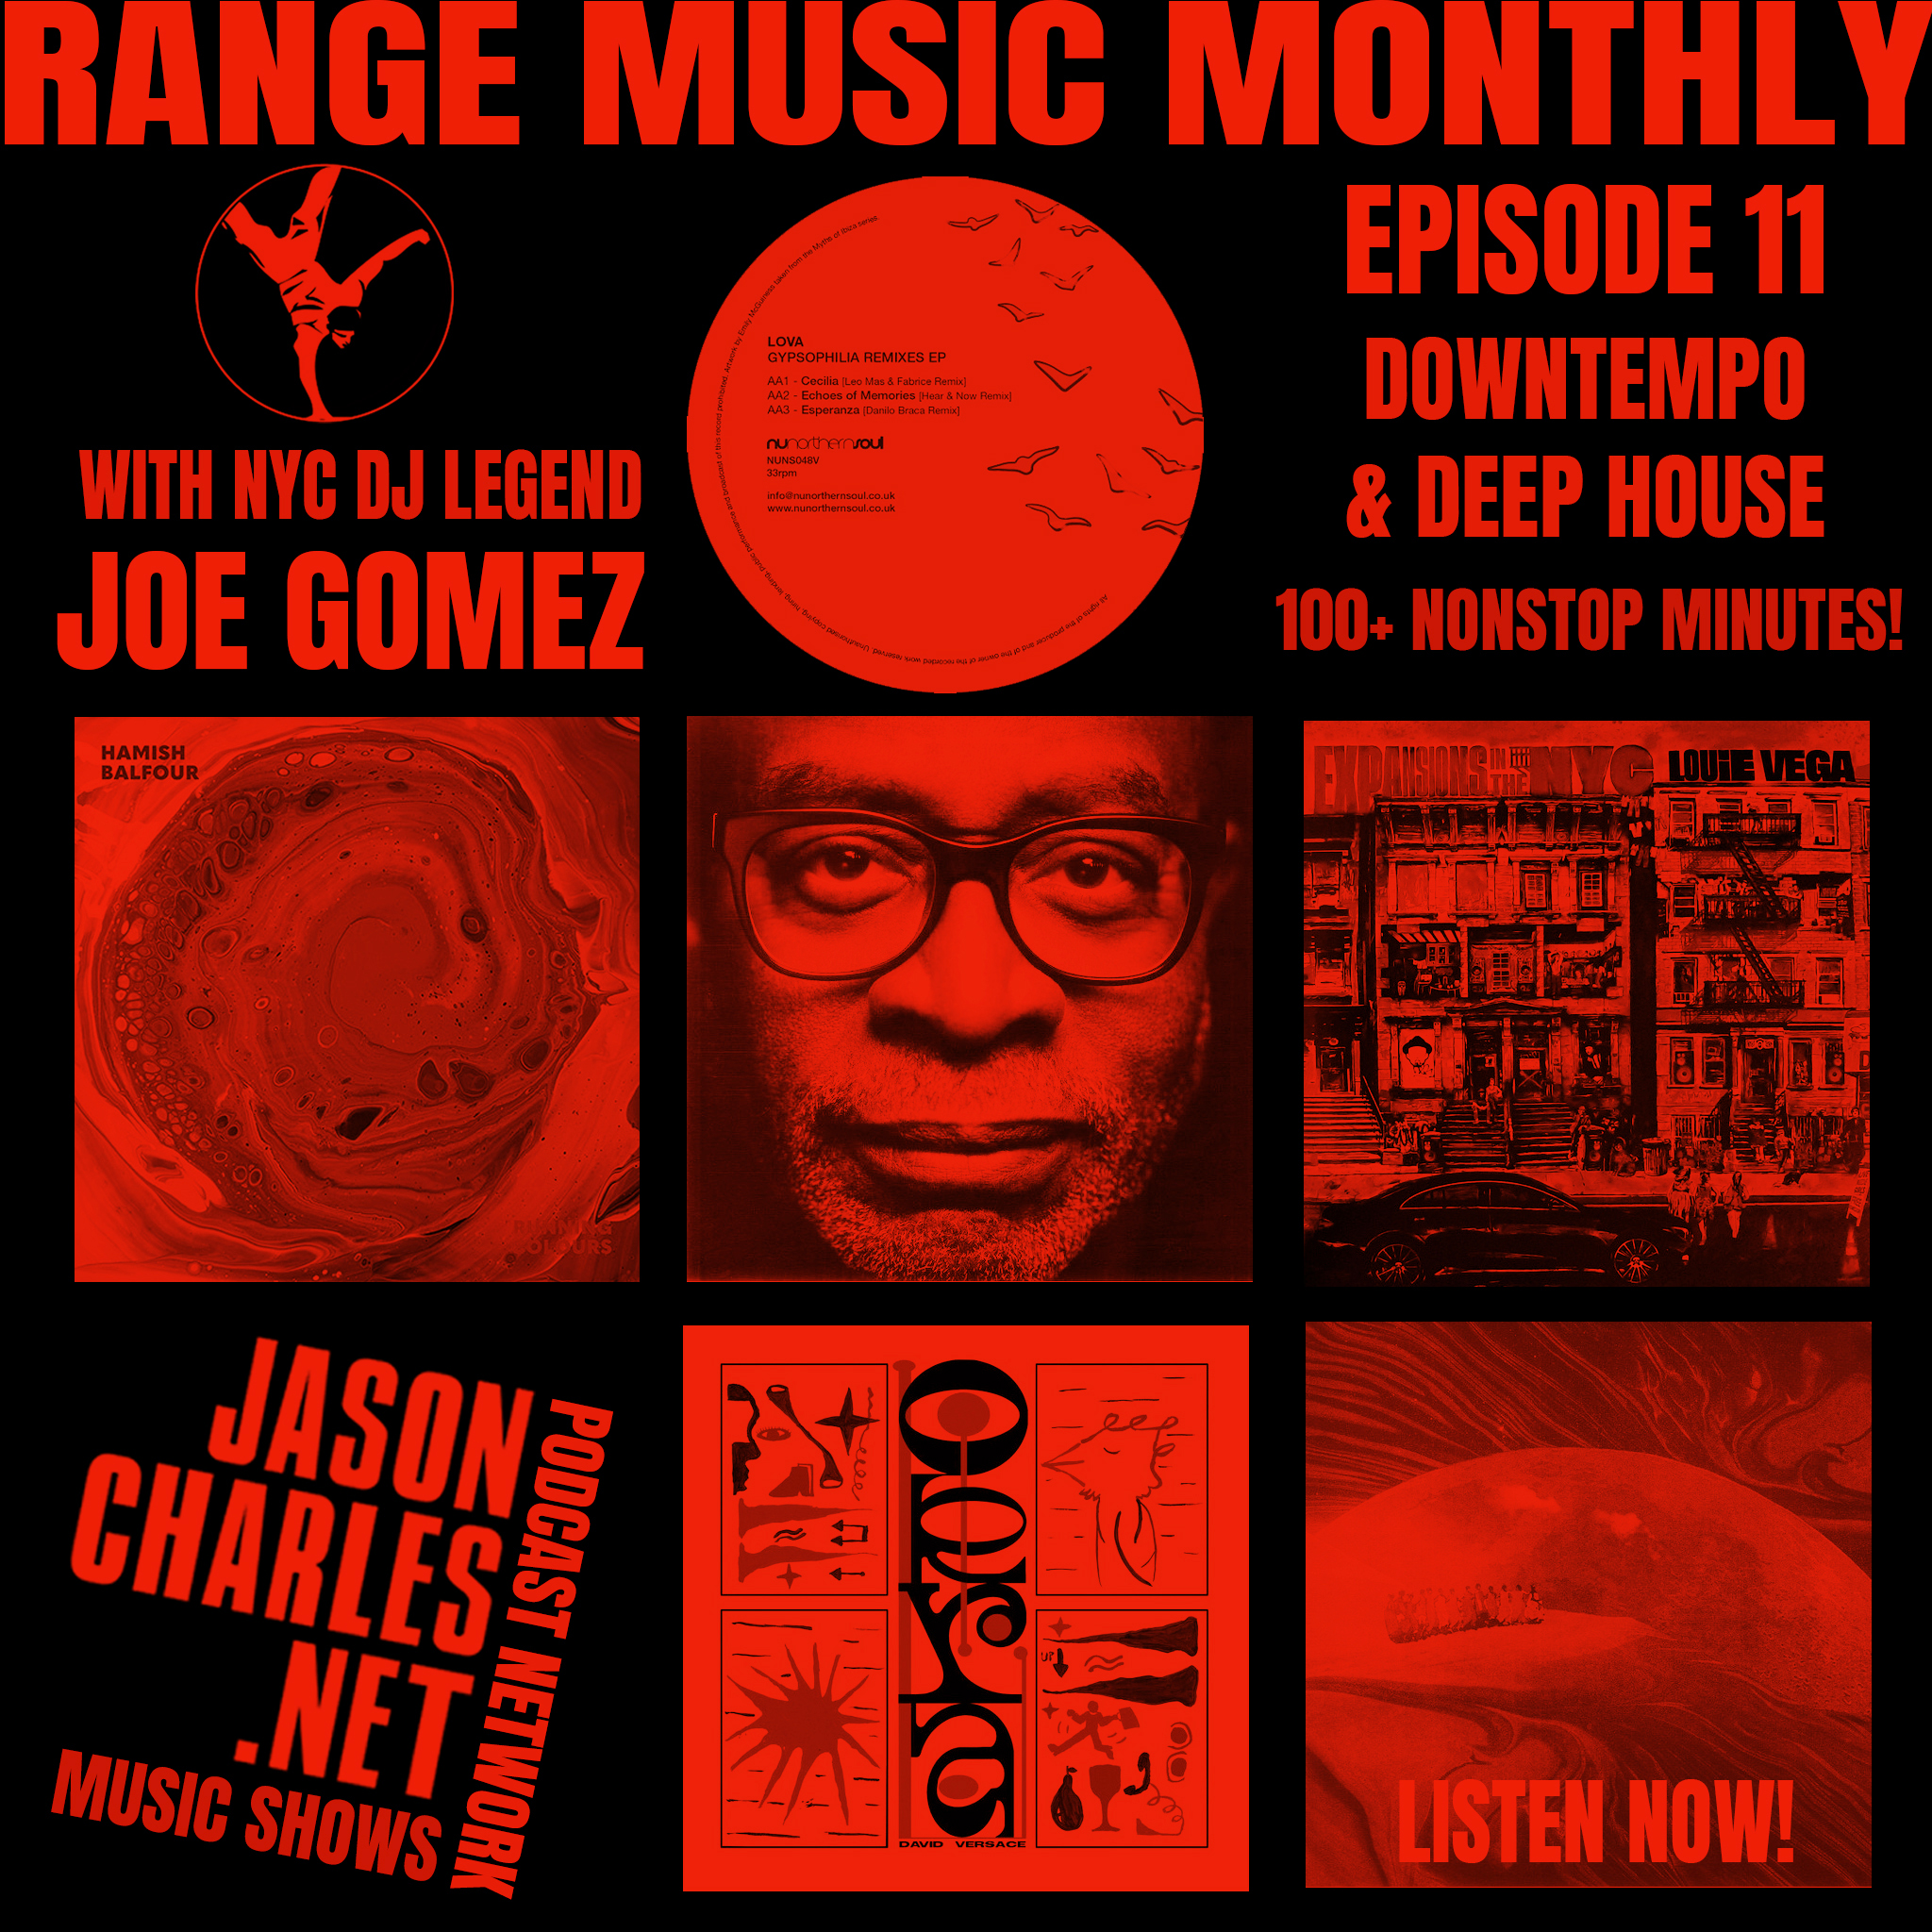 RANGE MUSIC MONTHLY Episode 11 Double Dose of Downtempo & Deep House